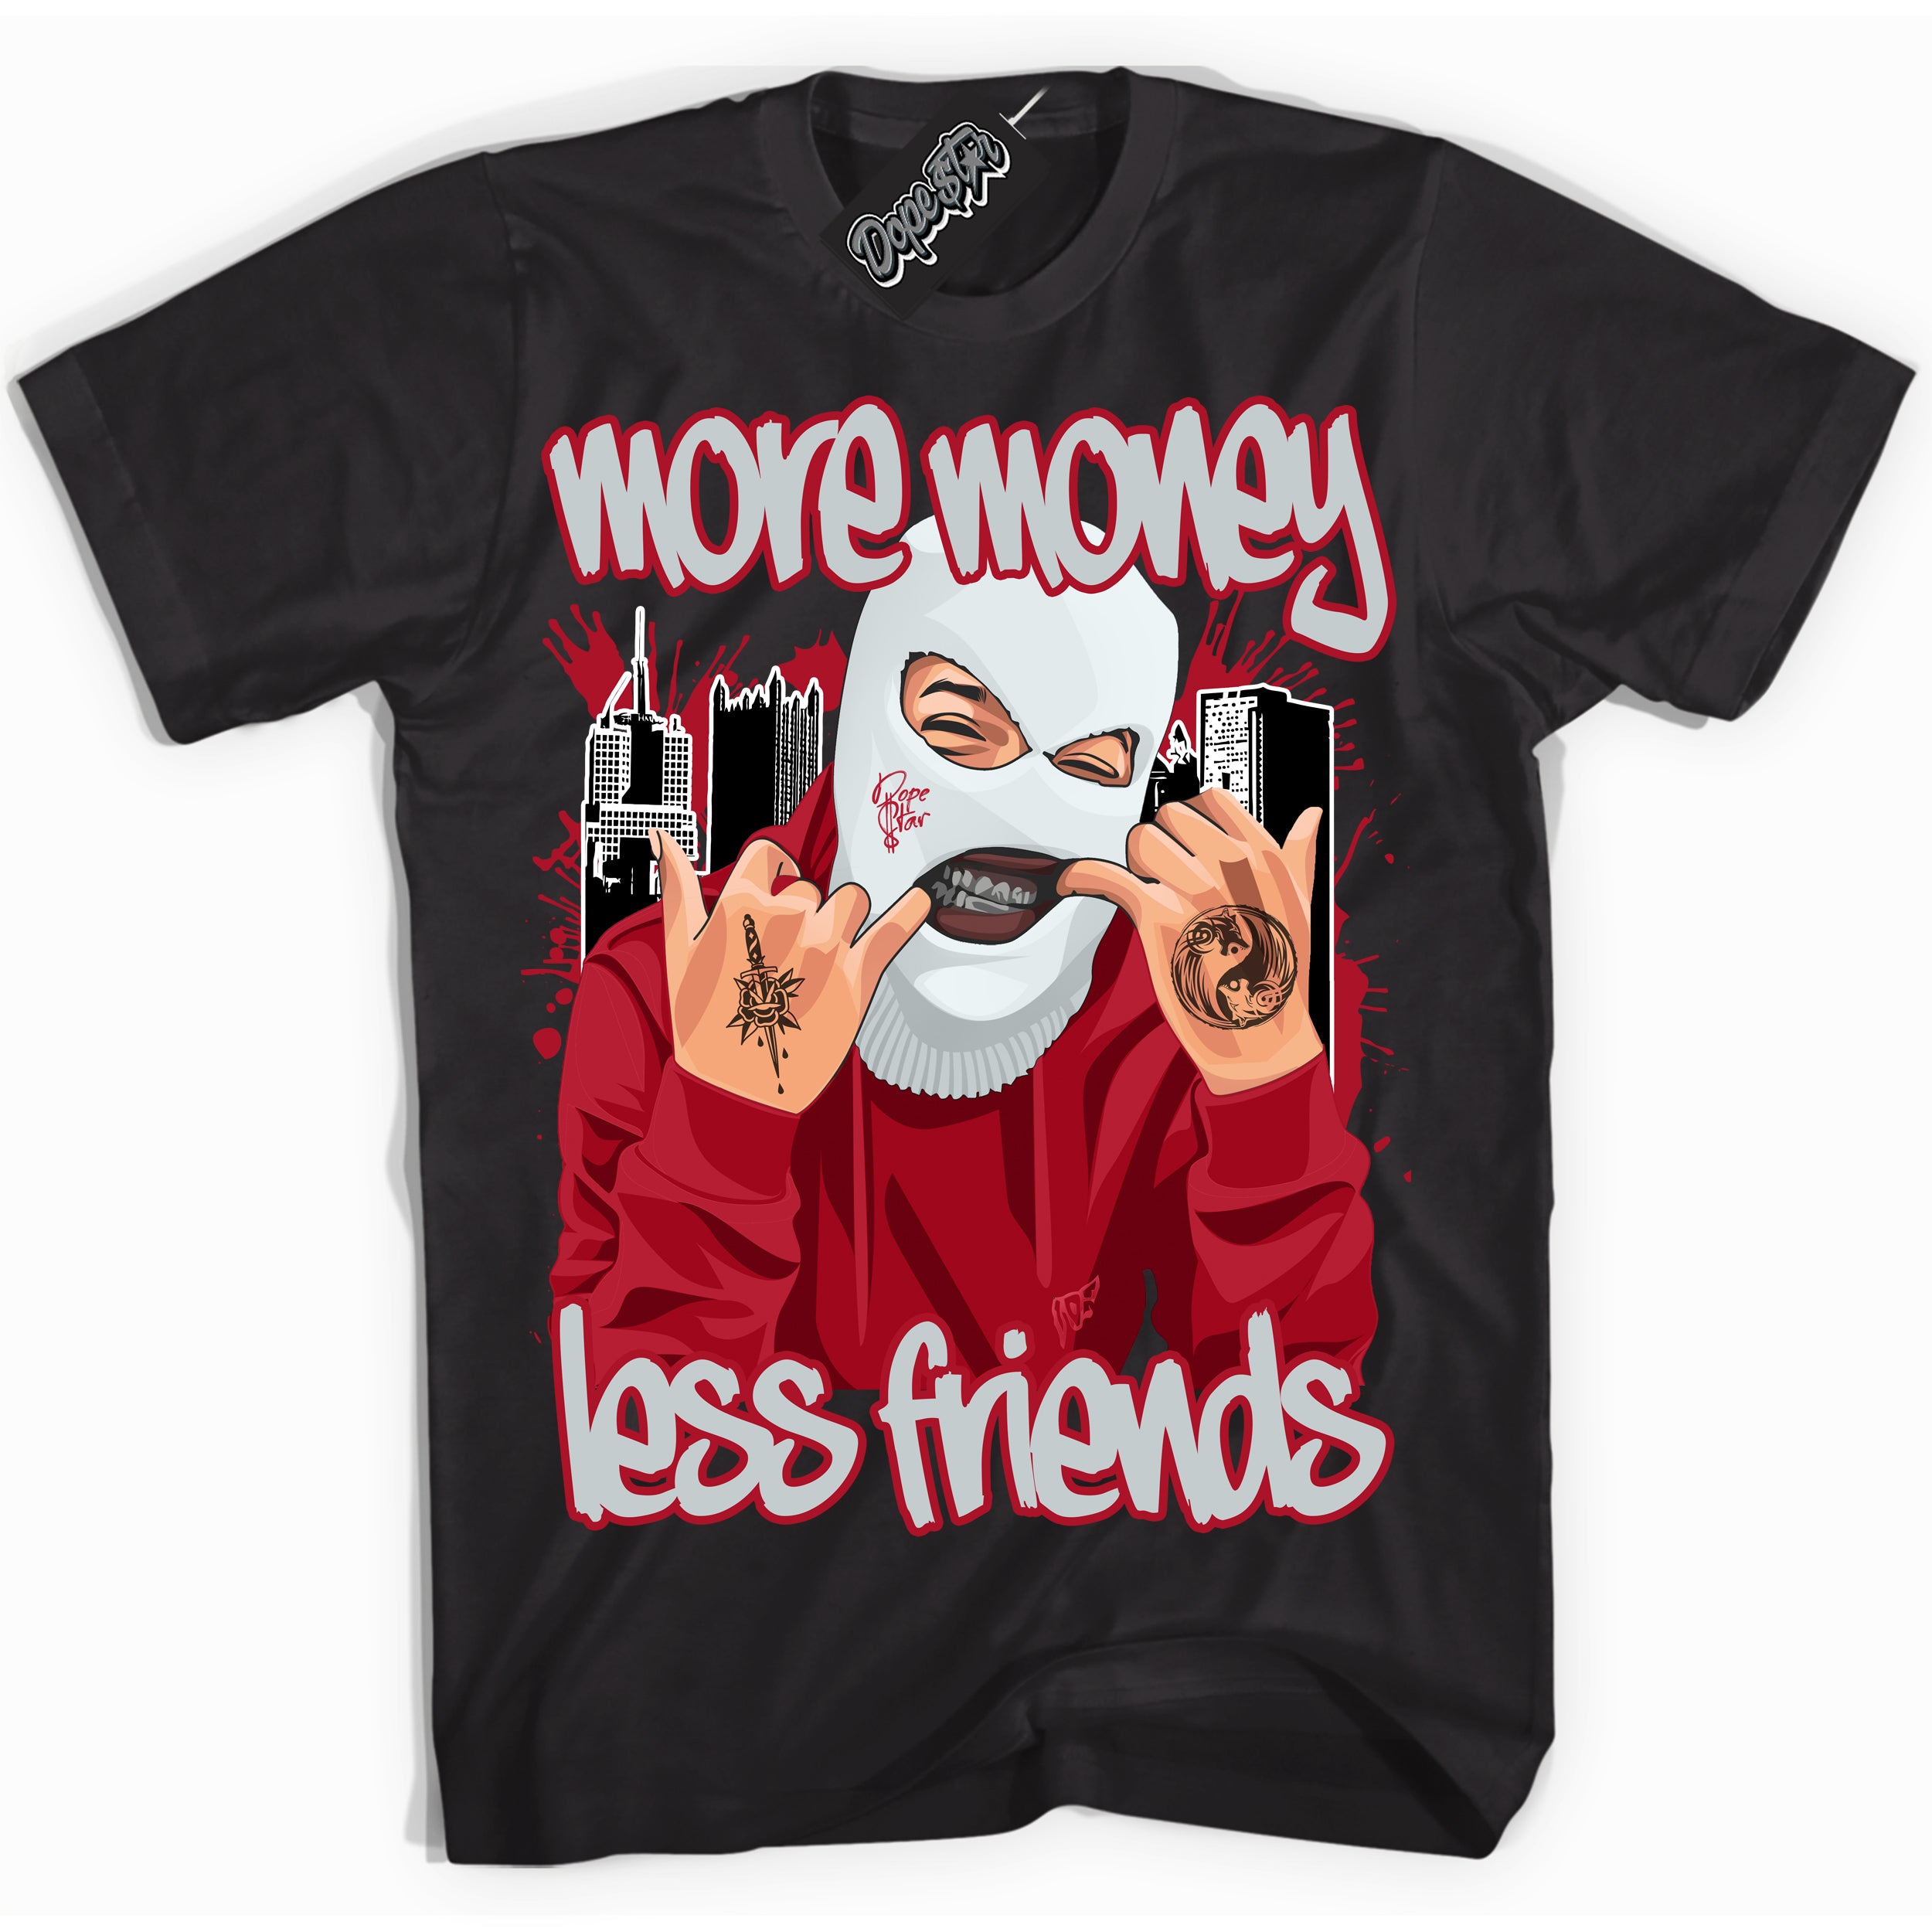 Cool Black Shirt with “ More Money Less Friends” design that perfectly matches Reverse Ultraman Sneakers.